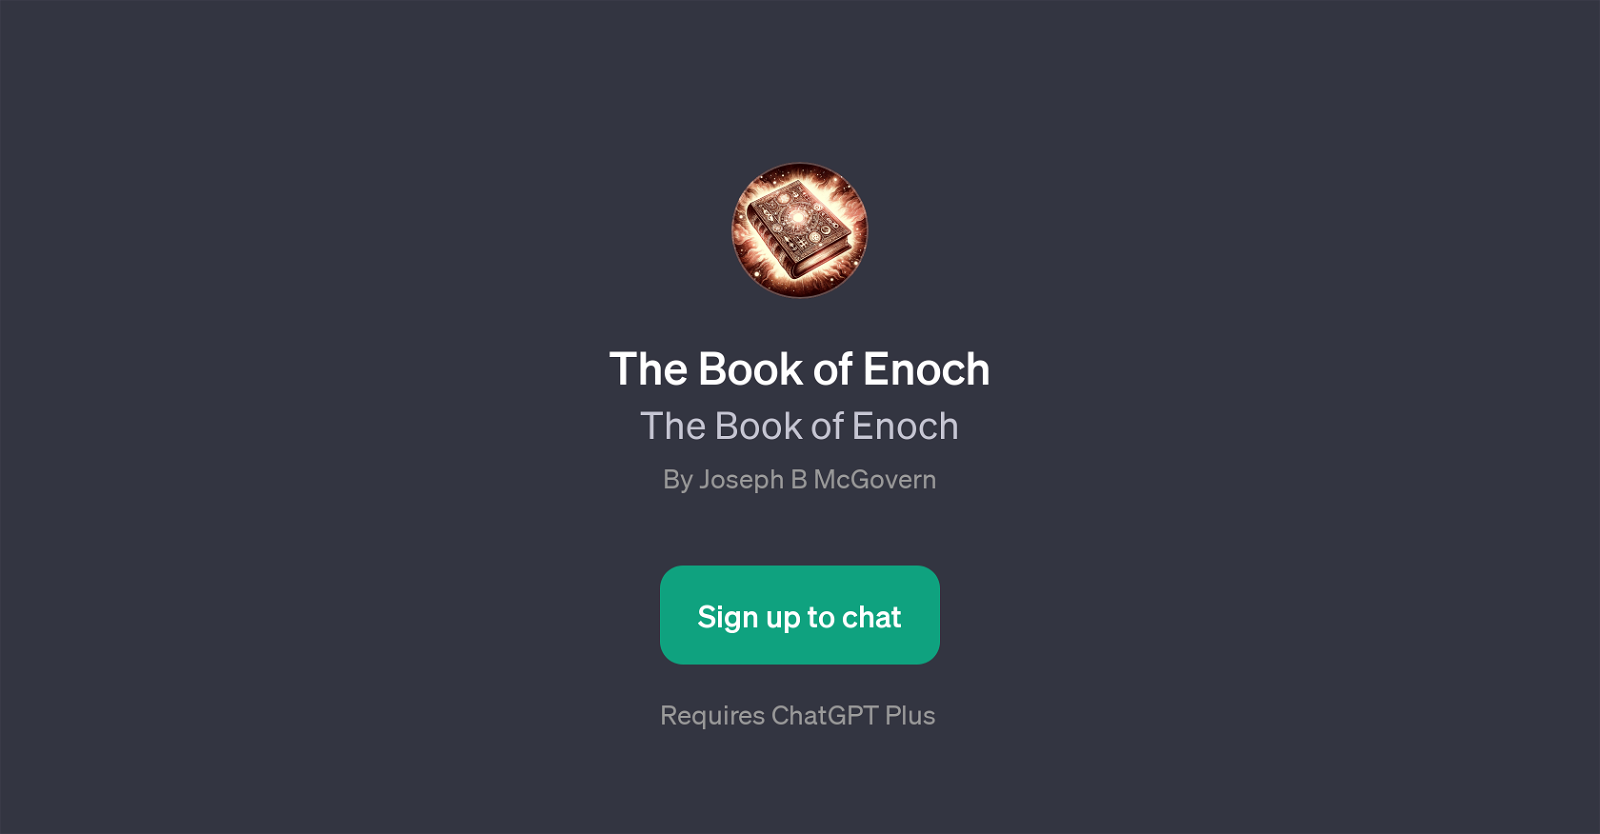 The Book of Enoch website